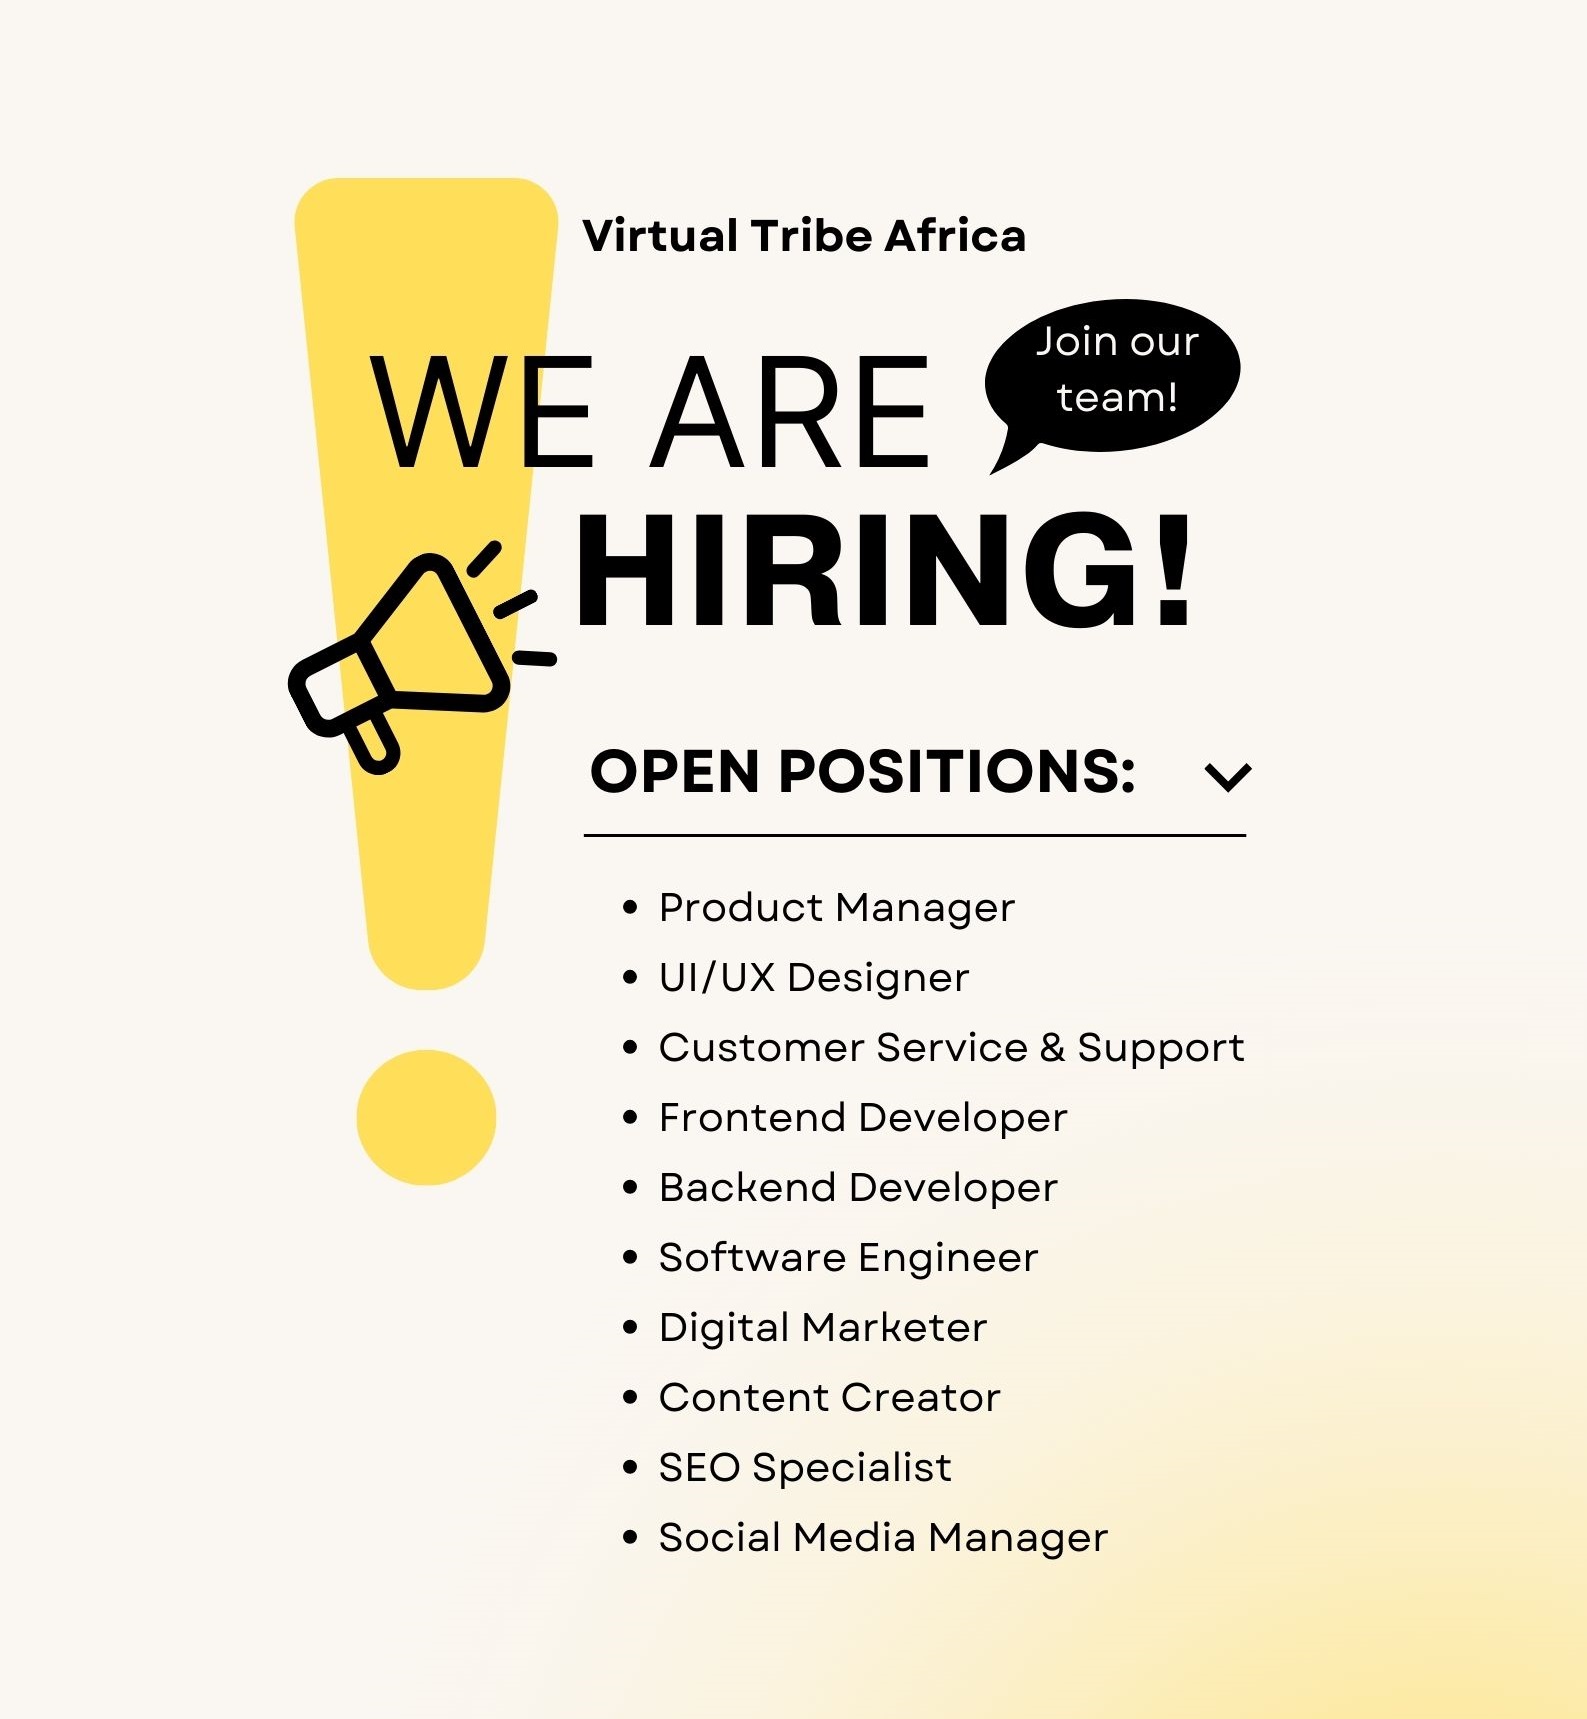 Frontend Developers Needed at Virtual Tribe Africa